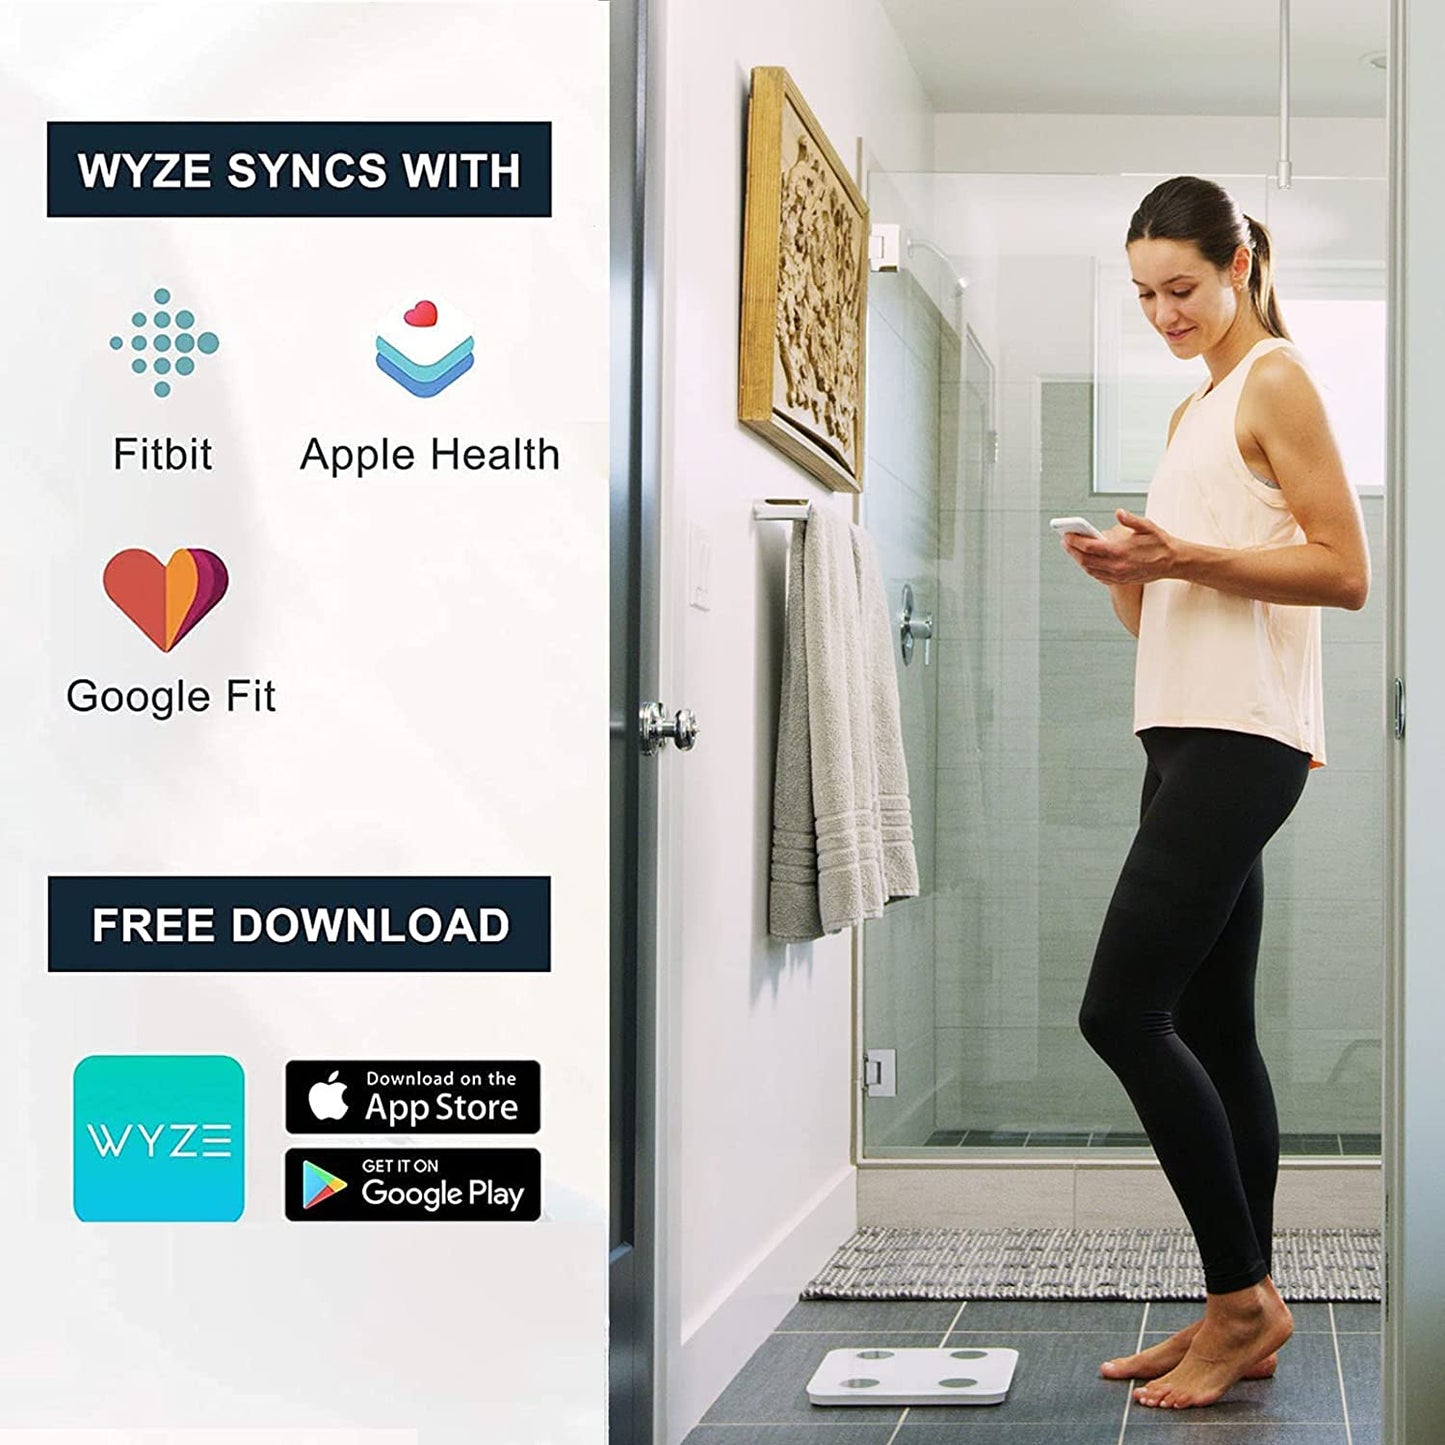 Woman standing behind scale looking at her phone. Text overlay says, "Wyze syncs with Fitbit, apple health, and google fit."